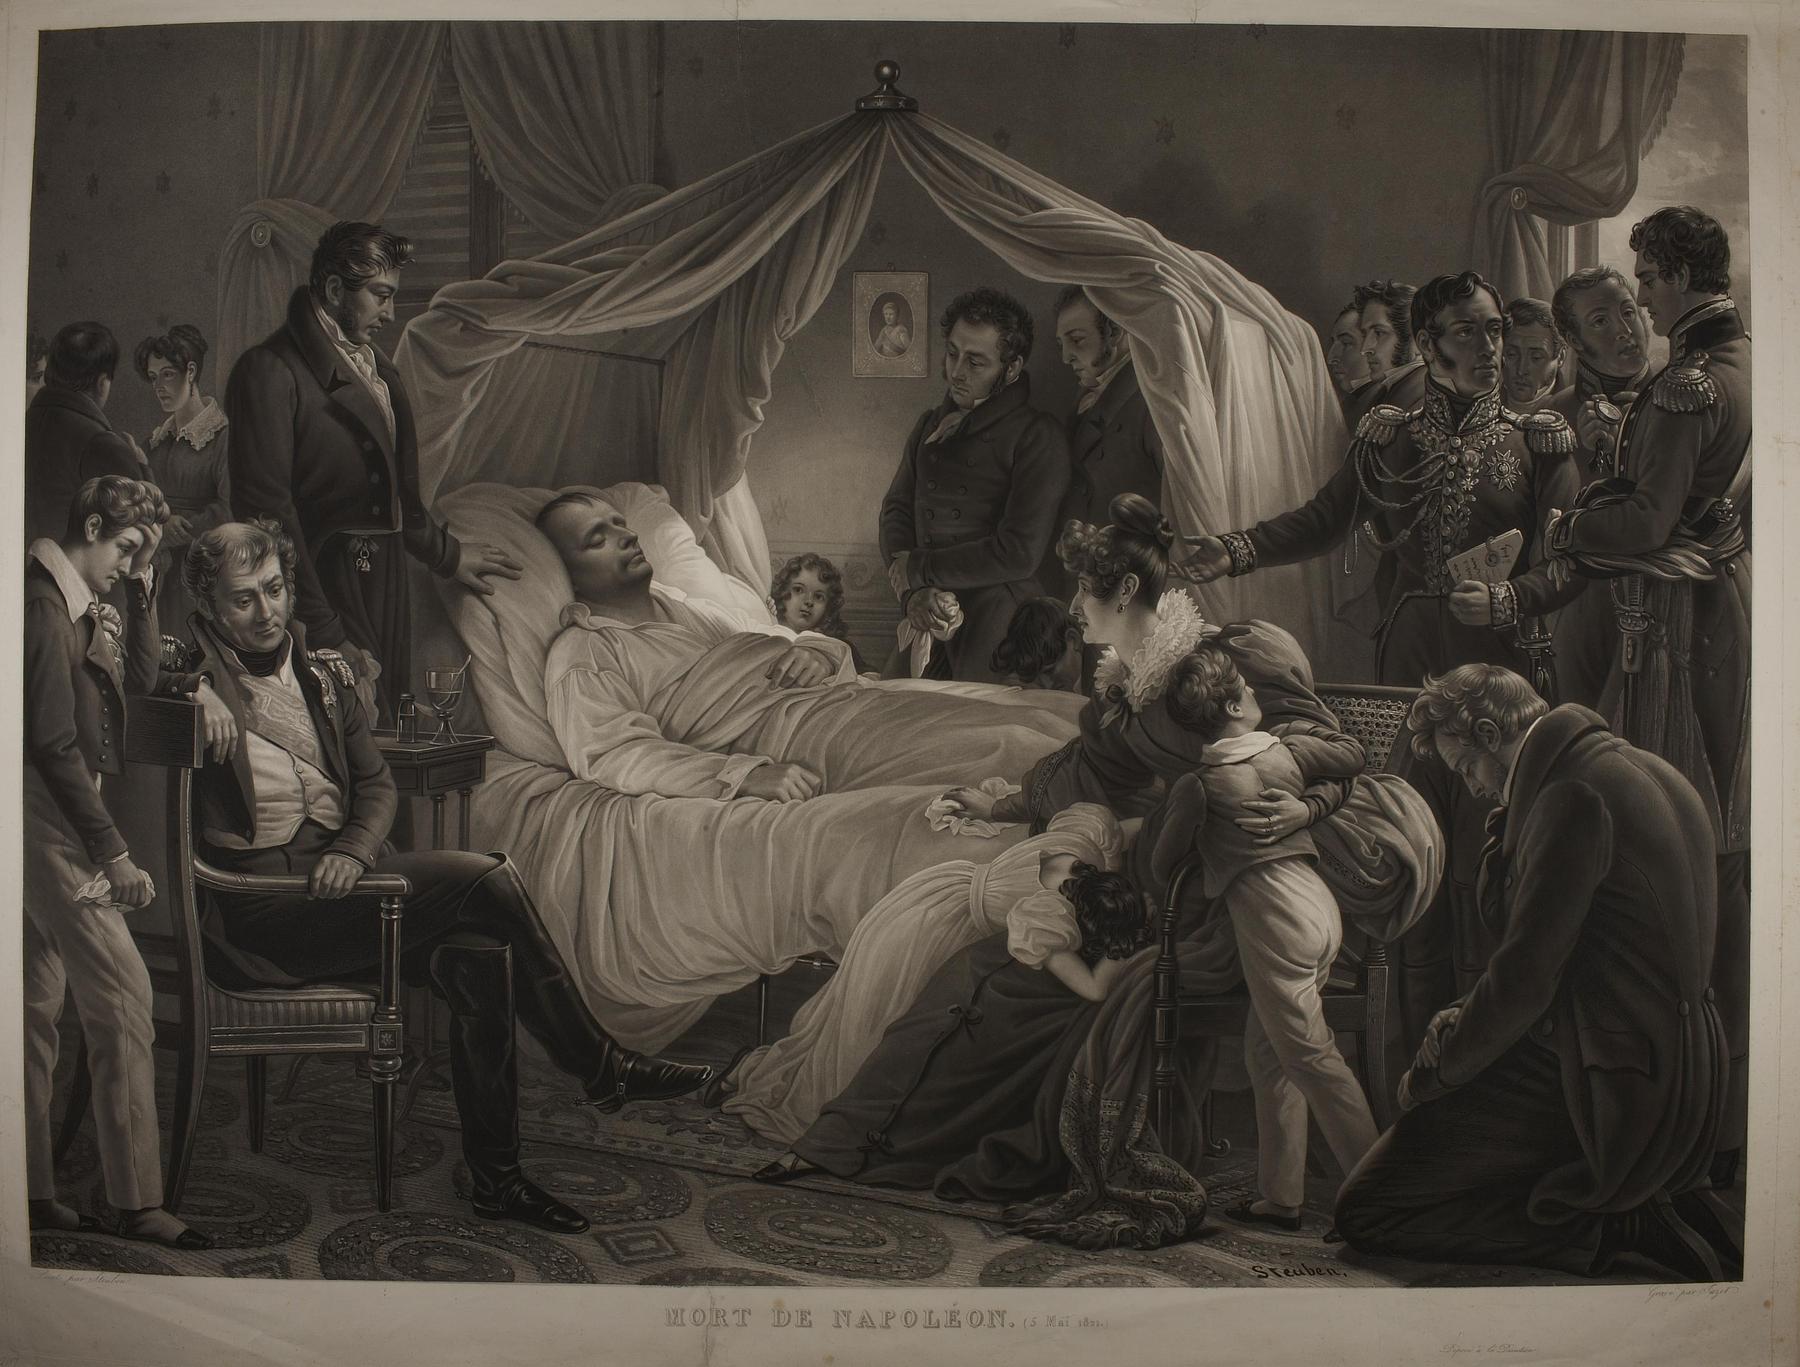 The Death of Napoleon in St. Helena, E633